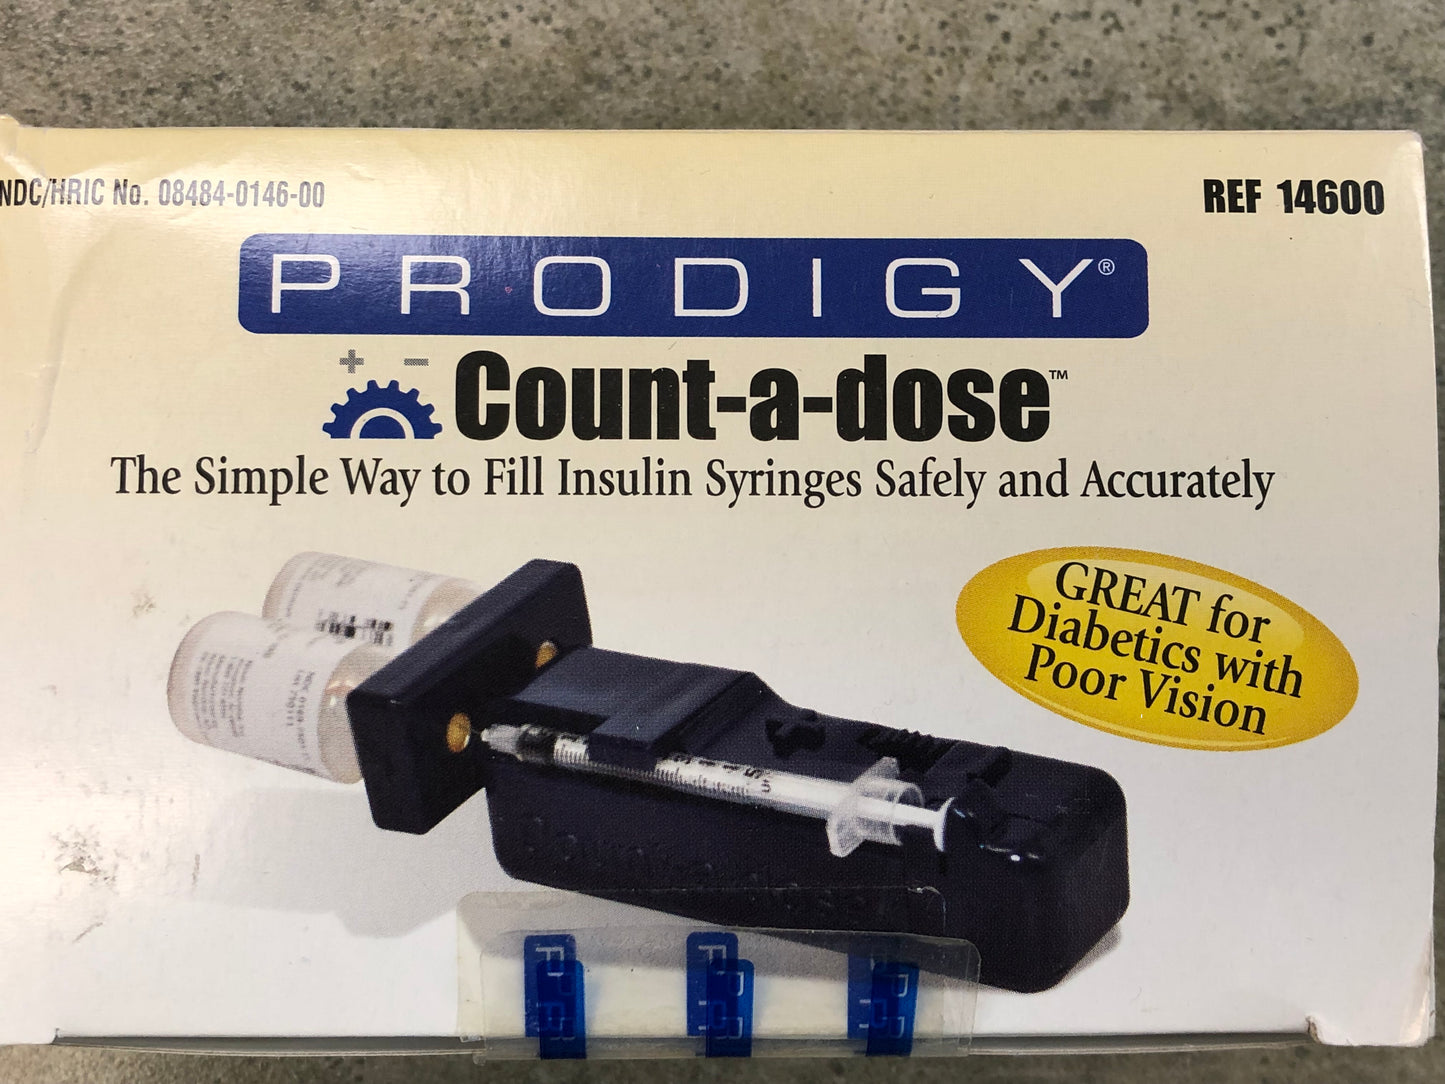 The Prodigy Count-A-Dose packaging showing the syringe locked into the palstic unit to fill from the bottles